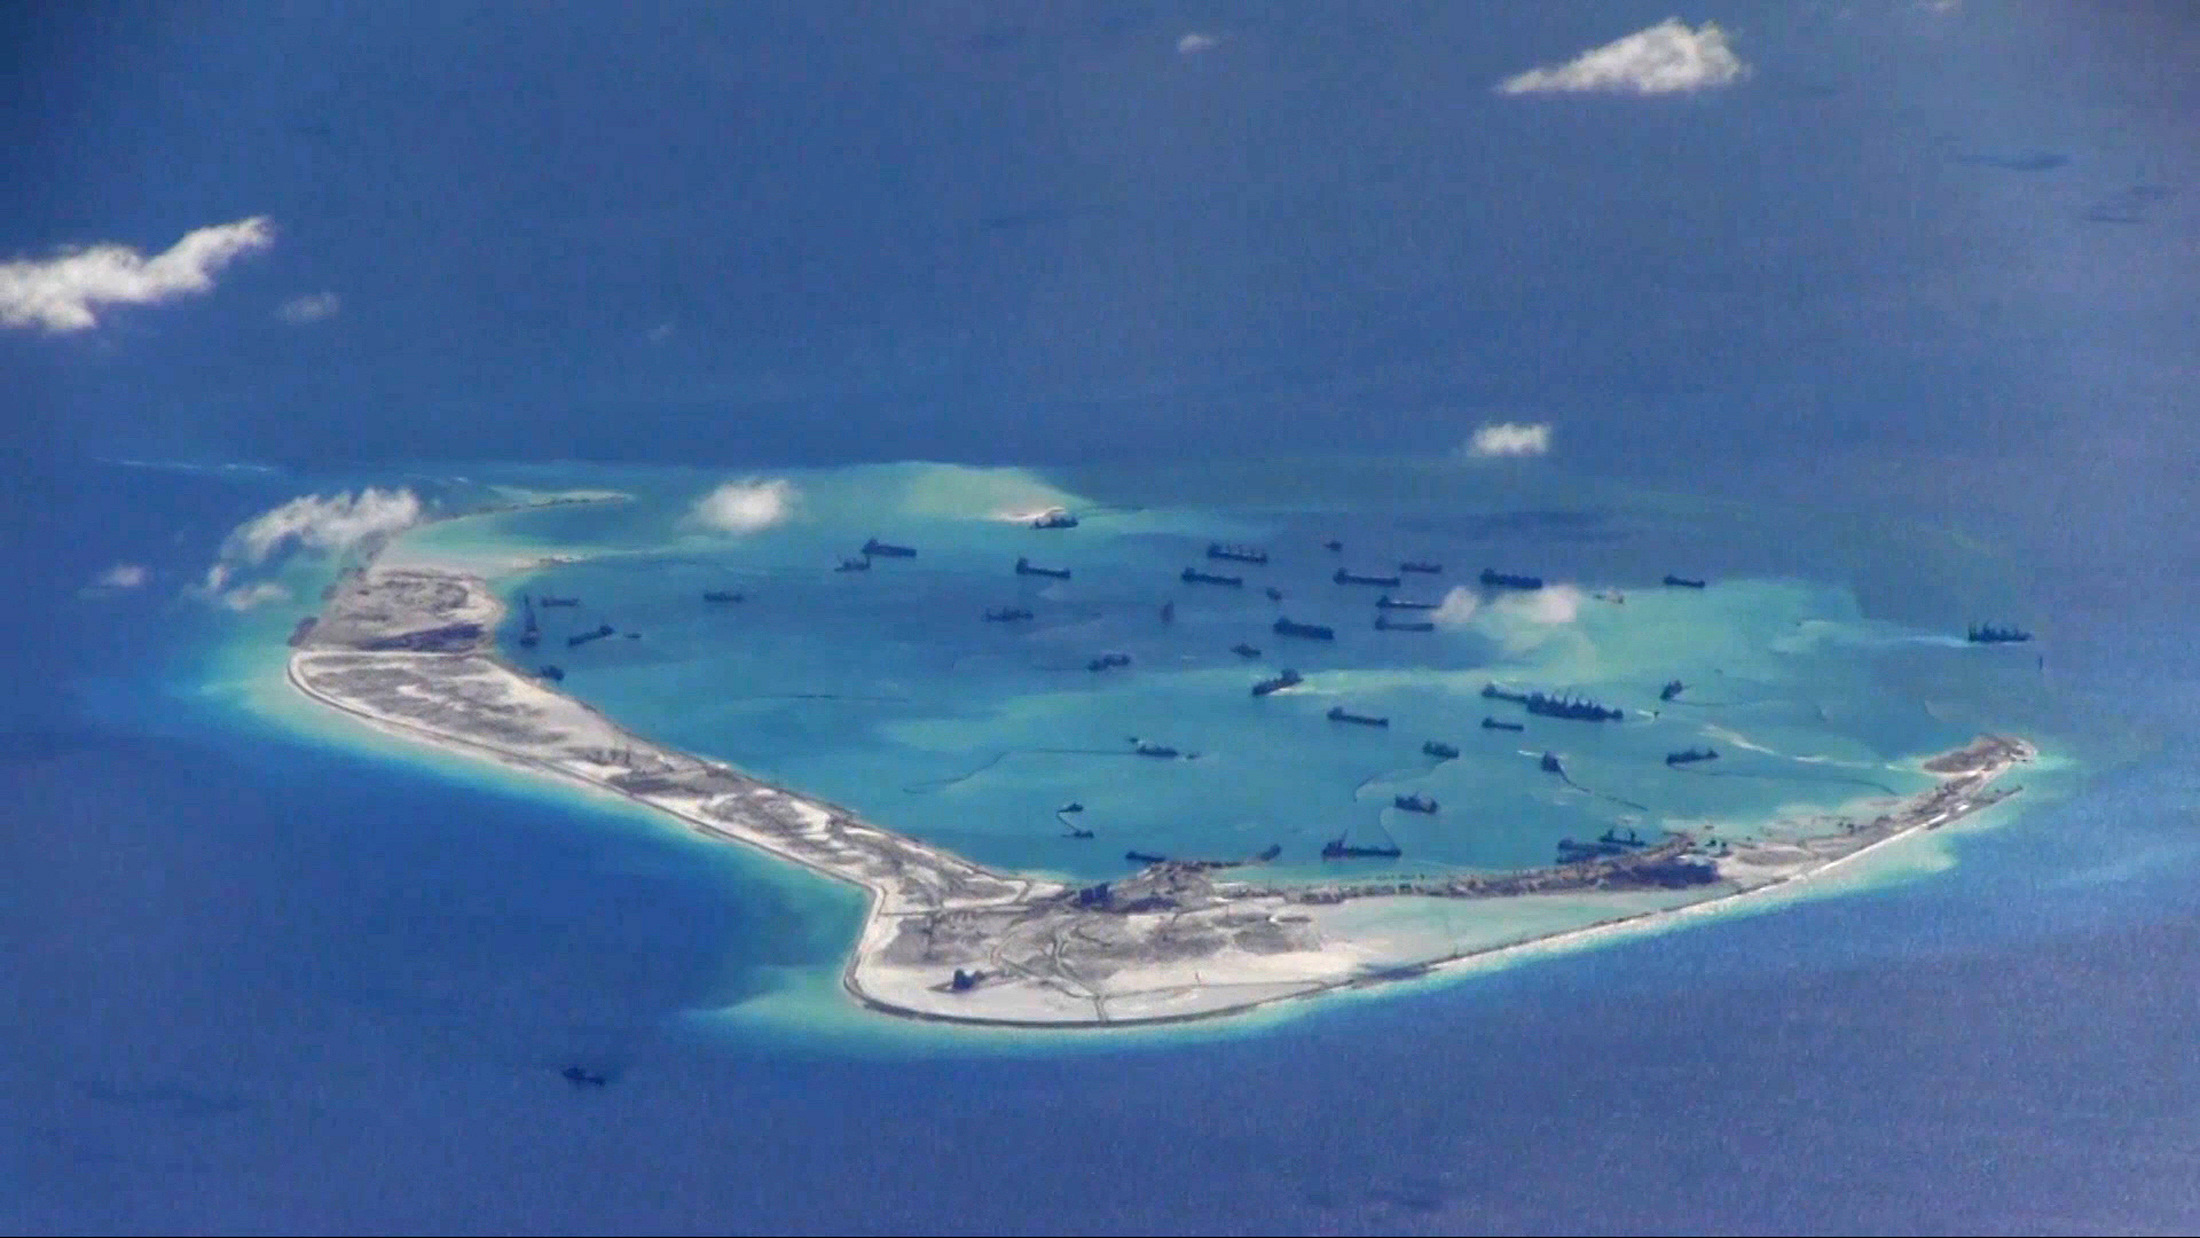 Chinese dredging vessels purportedly in the waters around Mischief Reef in the disputed Spratly Islands in the South China Sea in this still video image from a P-8A Poseidon surveillance aircraft provided by the U.S. Navy on May 21, 2015 (Handout/Reuters)